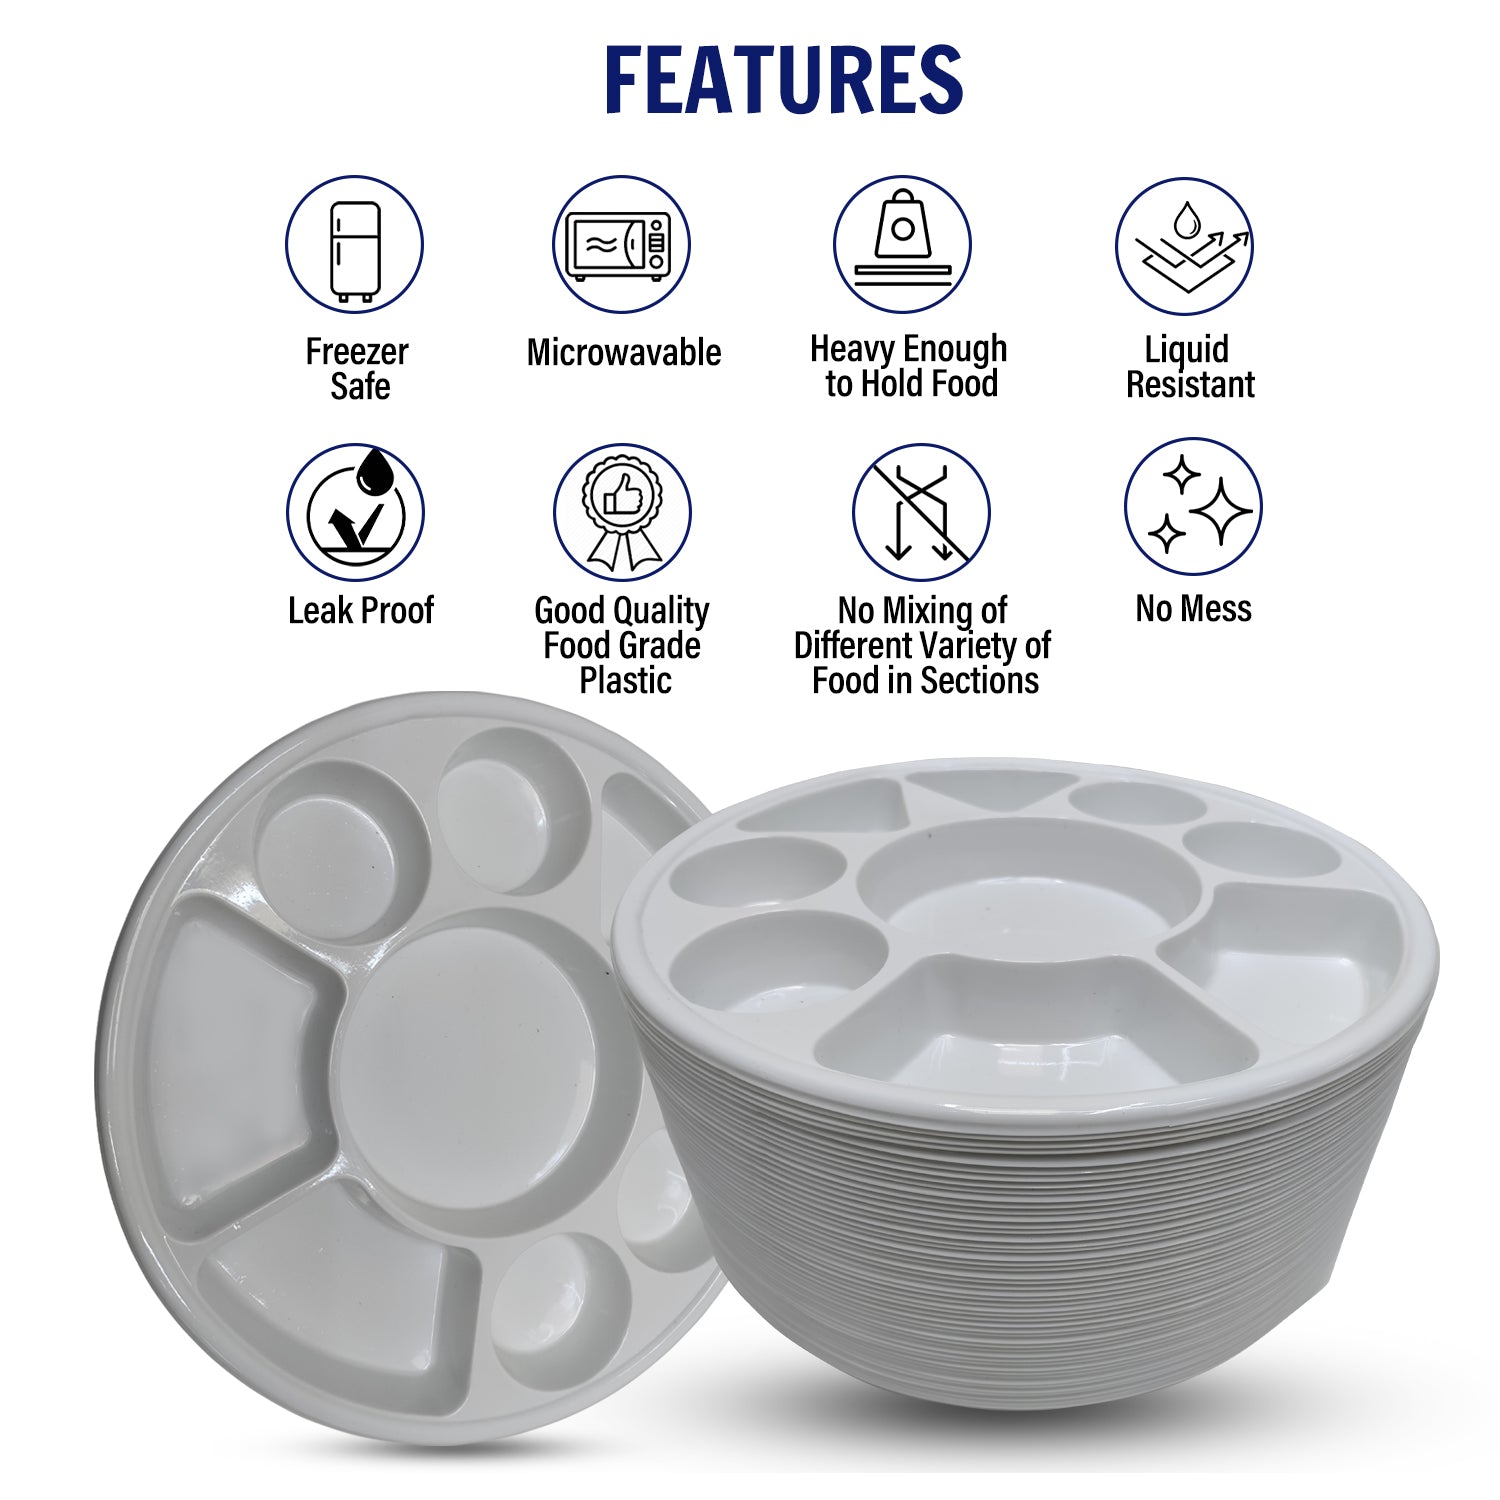 Clubgarga Disposable Plastic Plates Heavy Duty 9 Compartment Round White Coloured Reusable Plate Made Of Premium Quality Food Grade Plastic